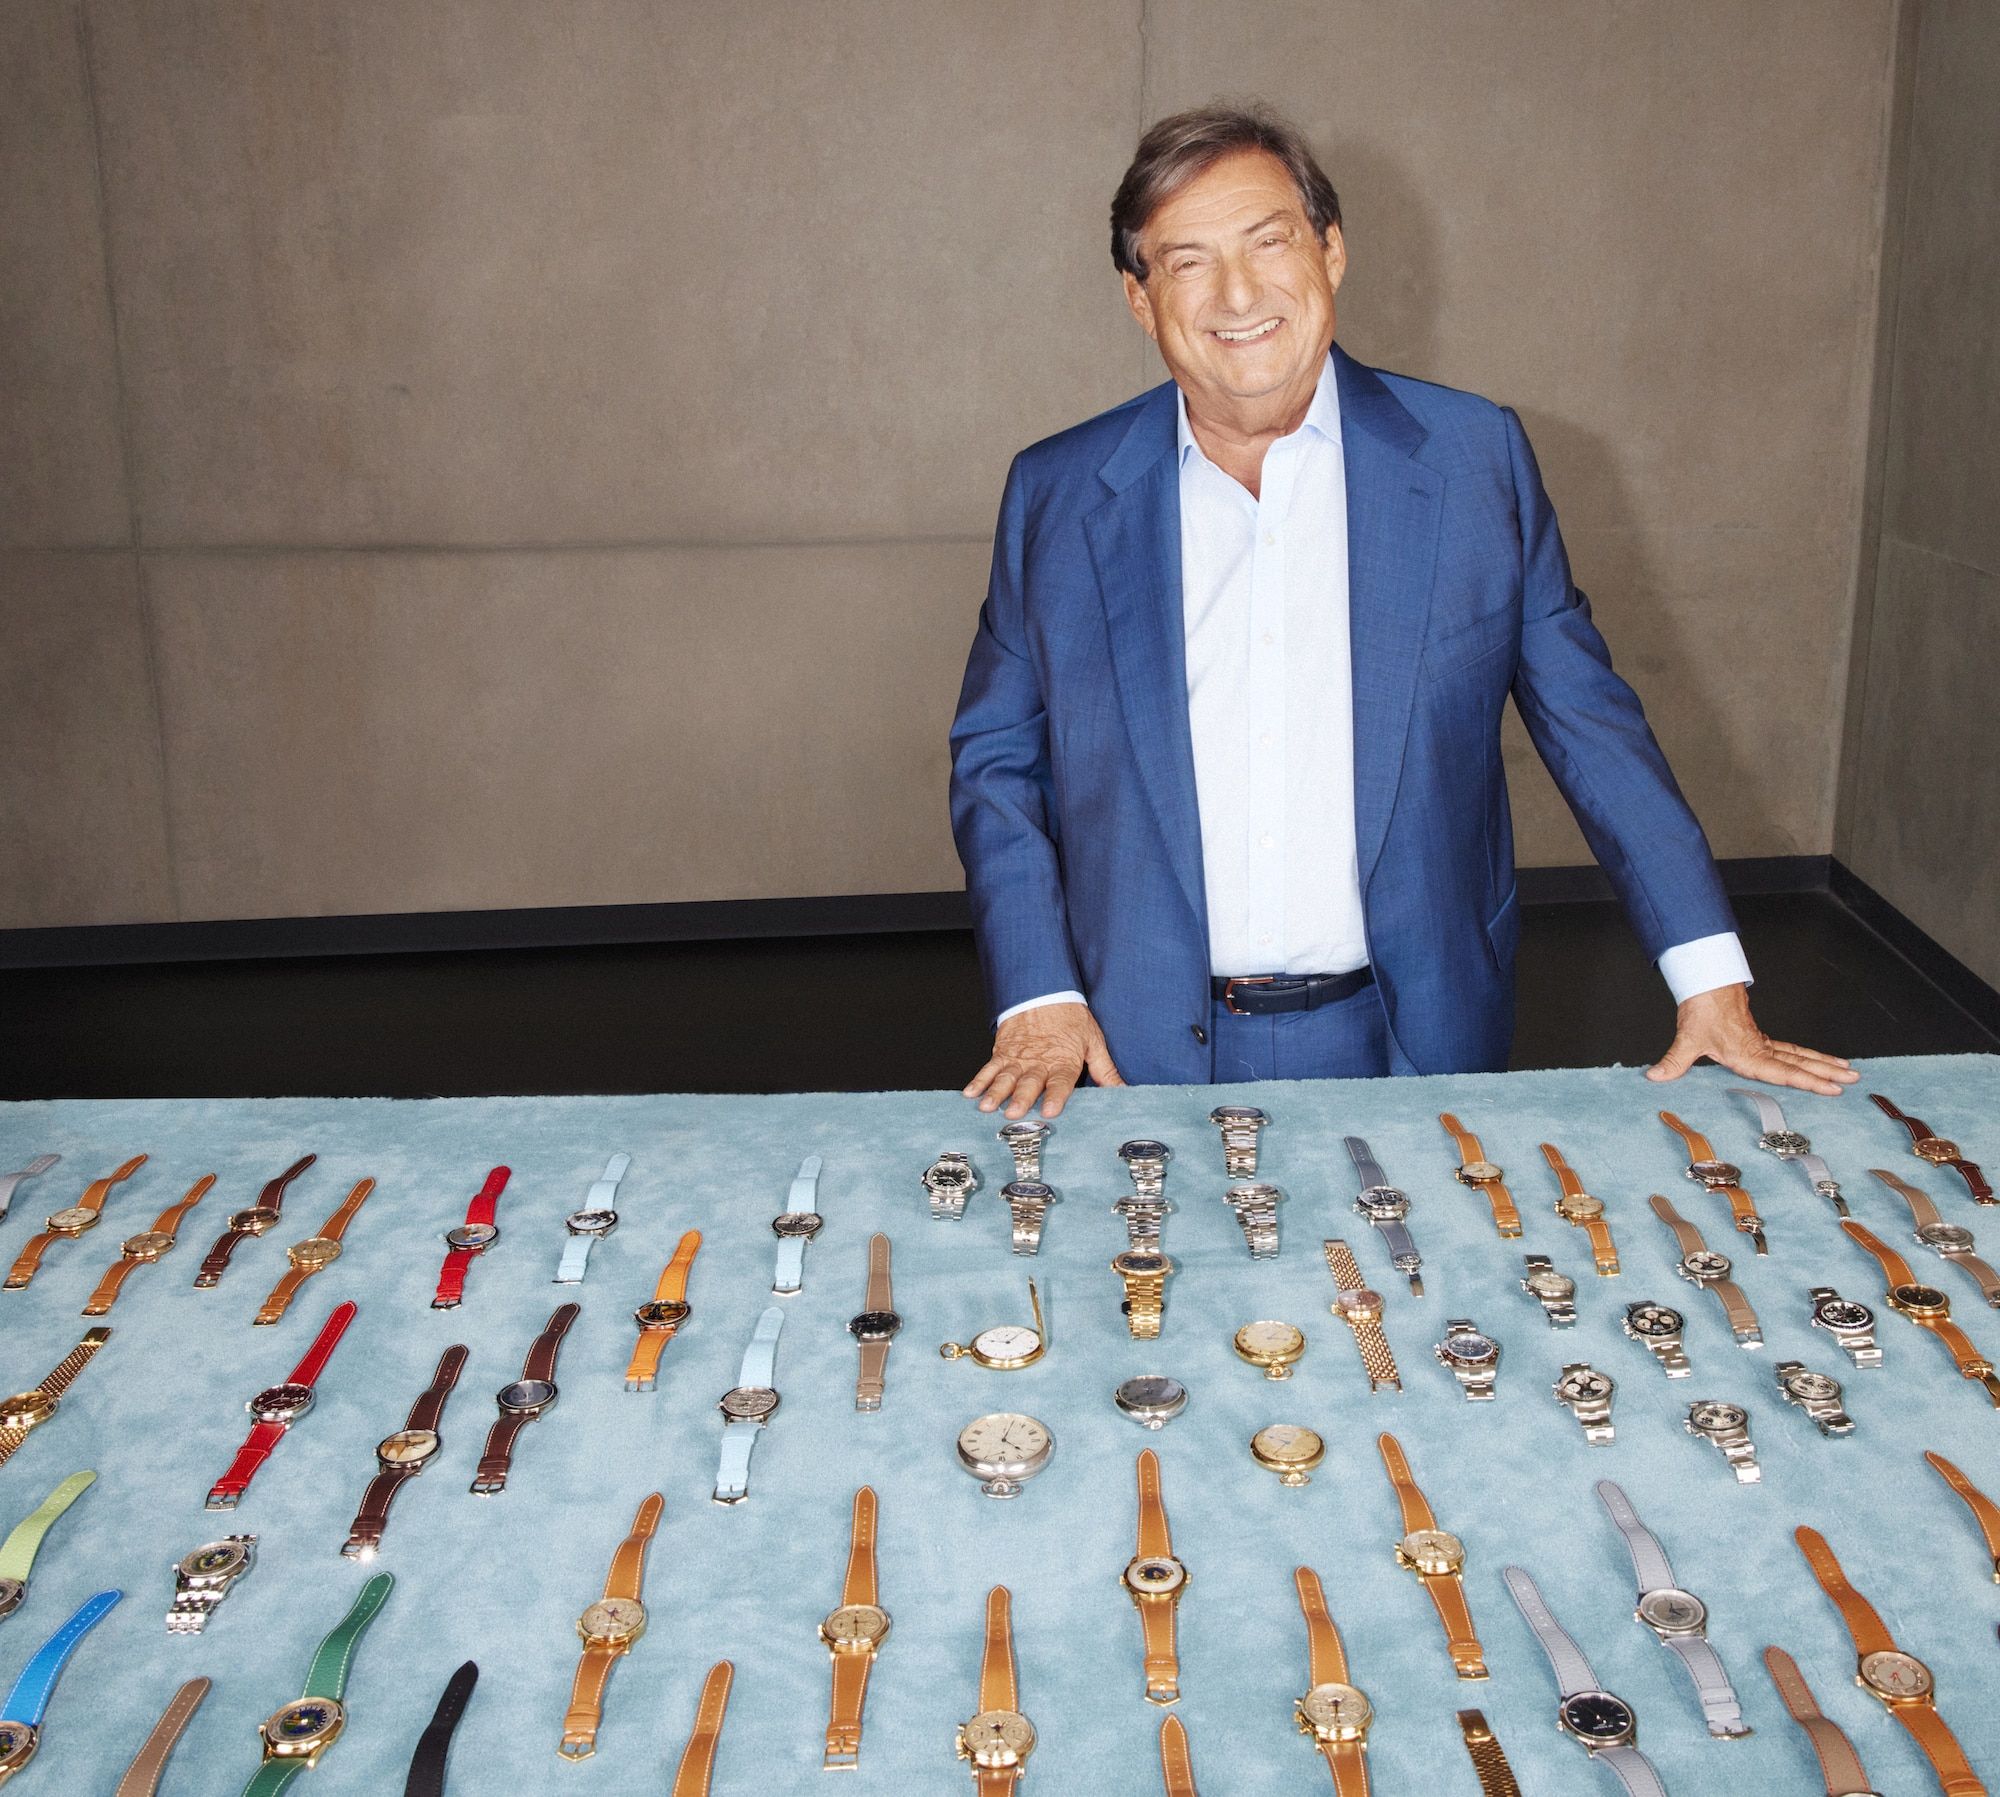 Get a Glimpse at One of the Most Valuable Watch Collections in the World